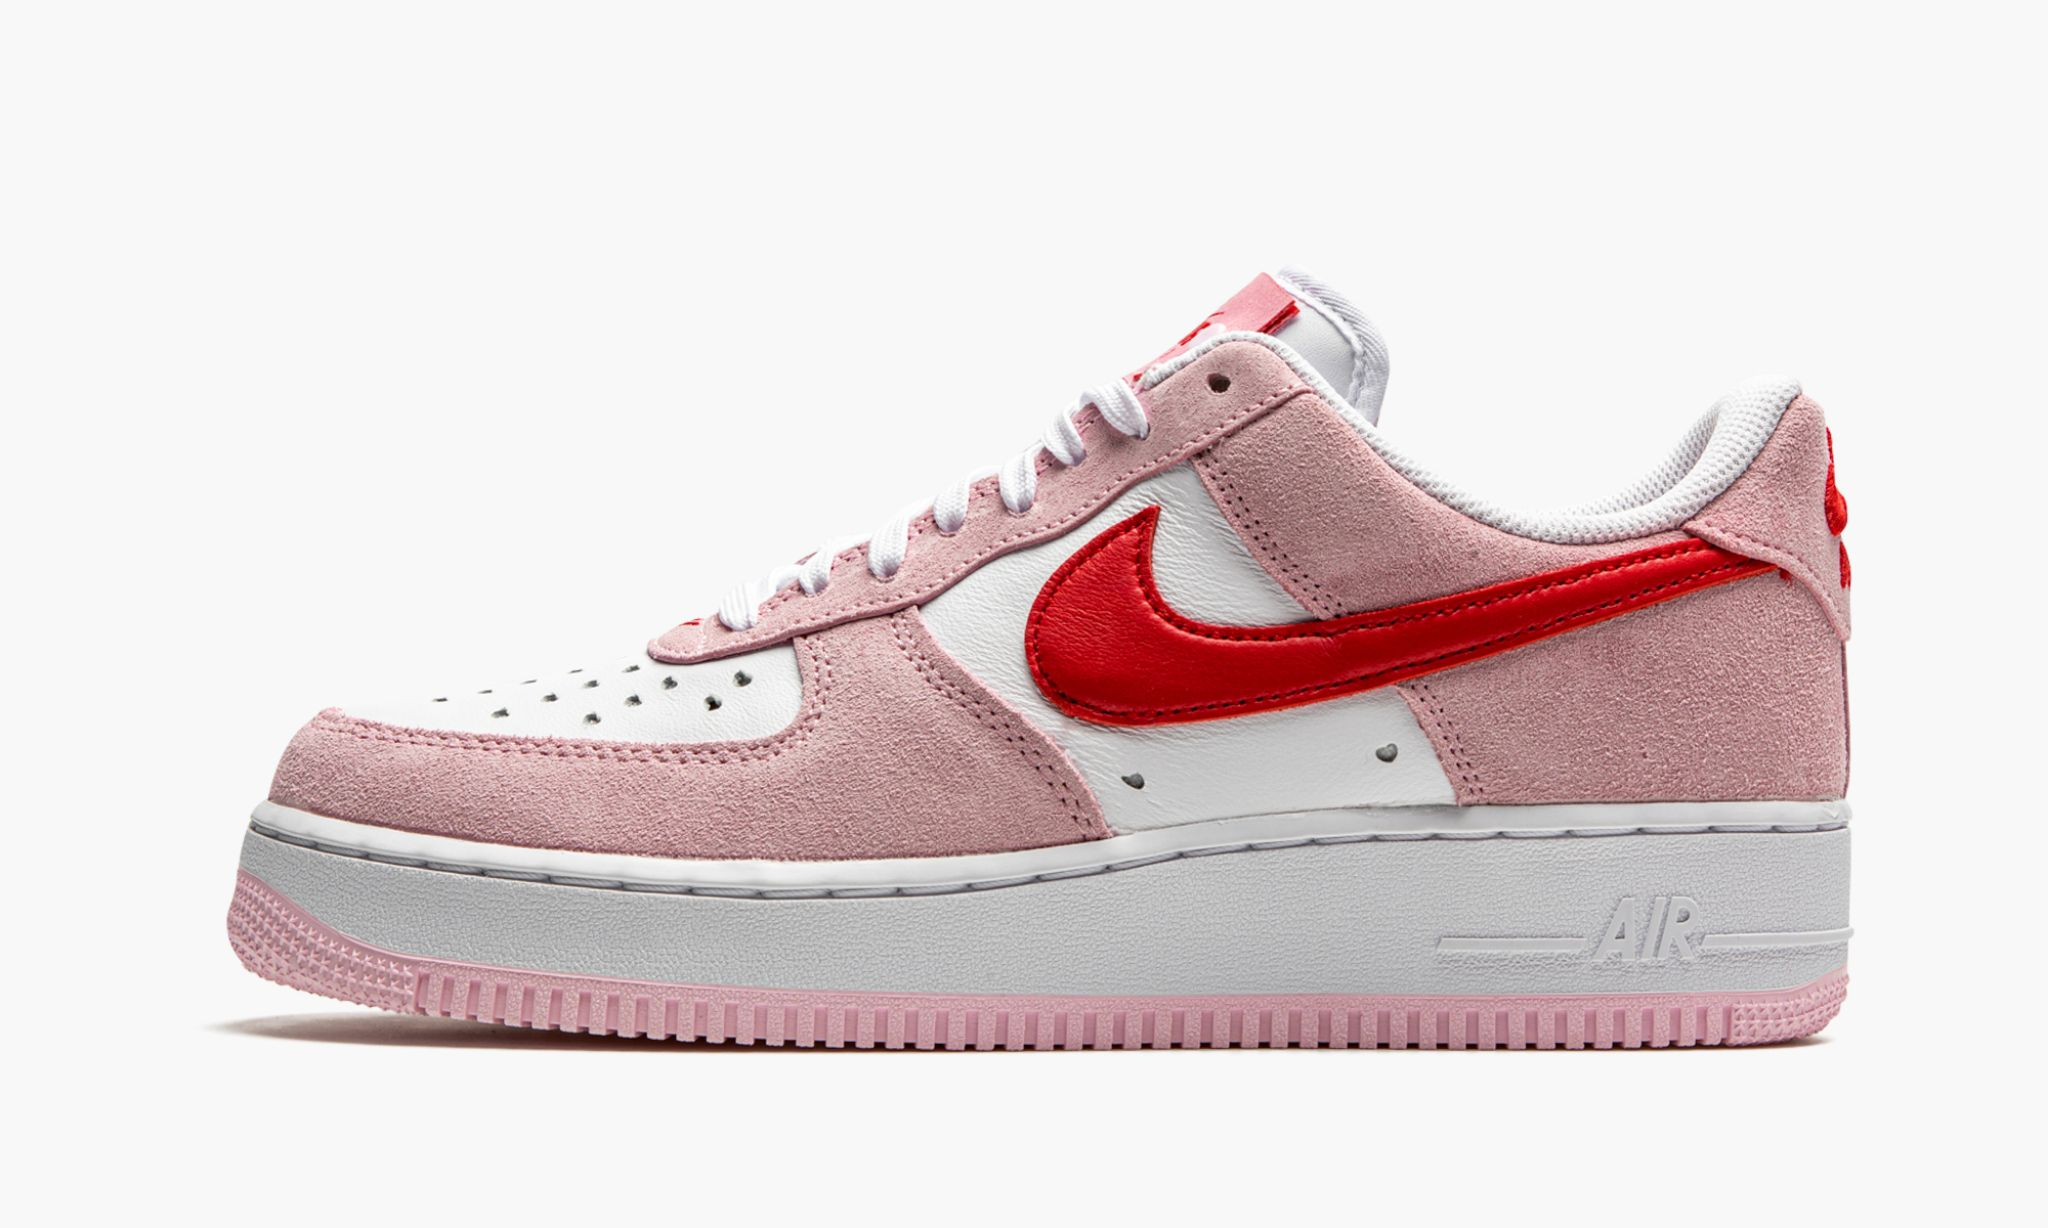 Nike Air Force Valentines Day 2021. Nike Air Force 1 07. Nike Air Force 1 Low Valentines Day. Nike Air Force 1 Low. Air force 1 low valentine s day